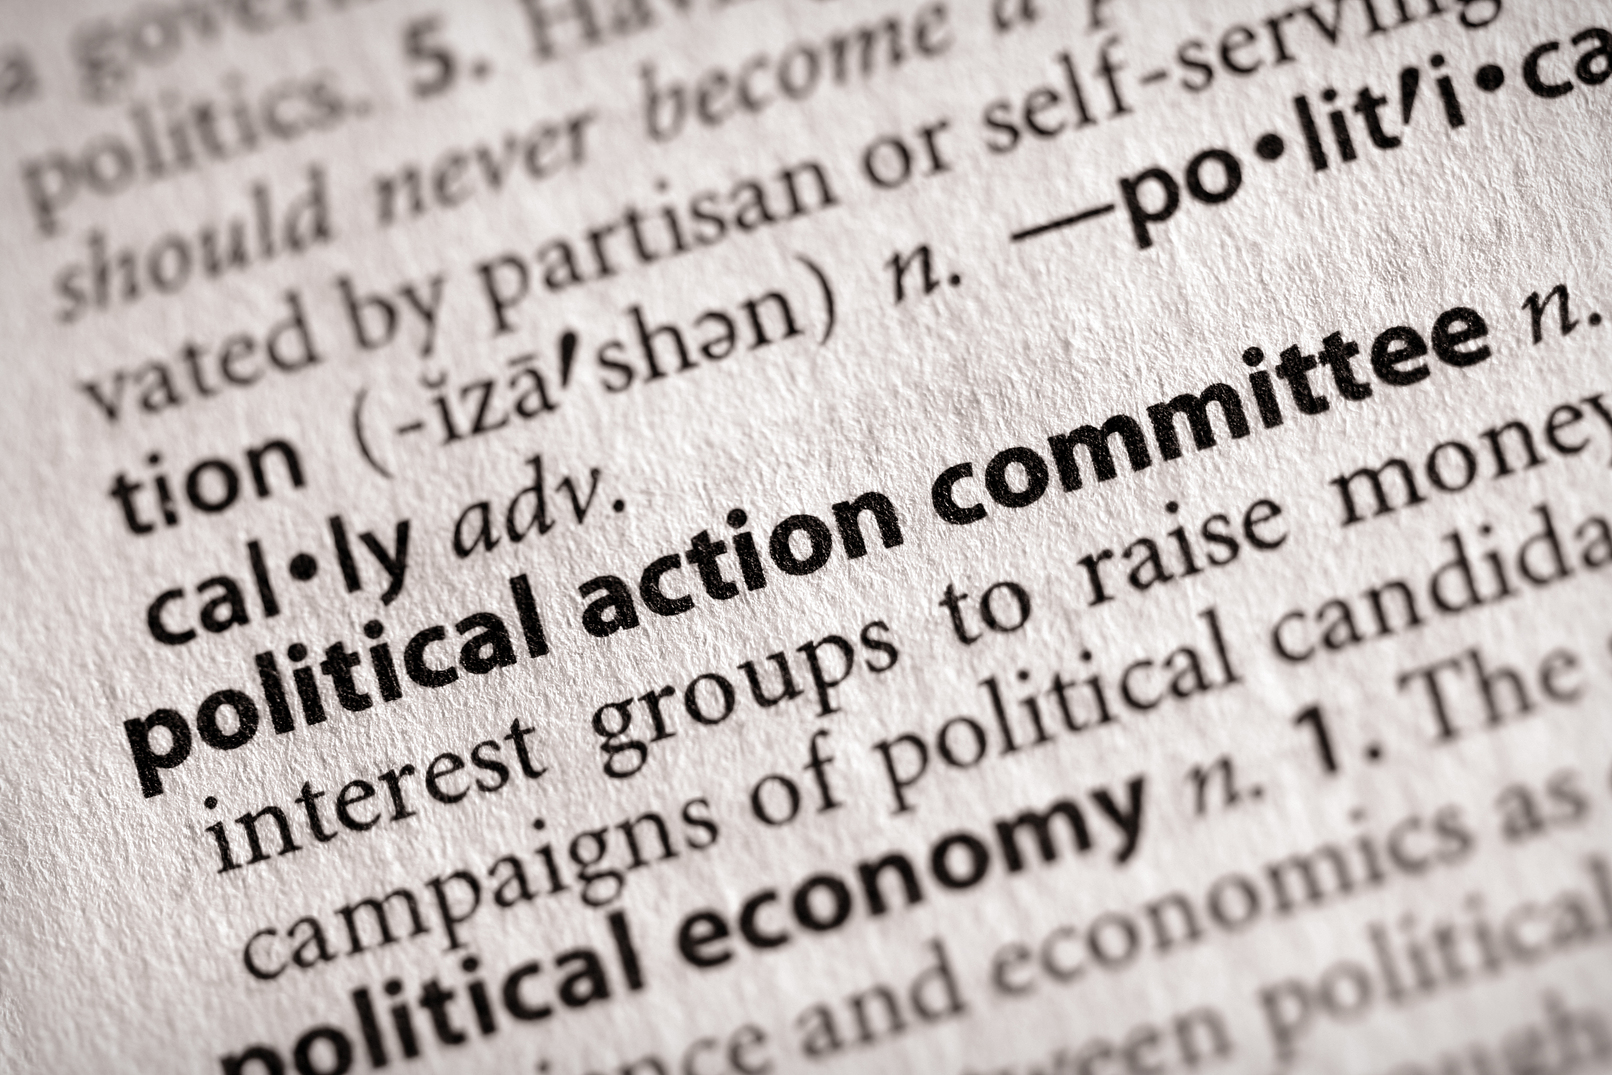 8th Circuit Court of Appeals Holds That Political Action Committees Have Freedom of Speech and Association Rights Under the First Amendment